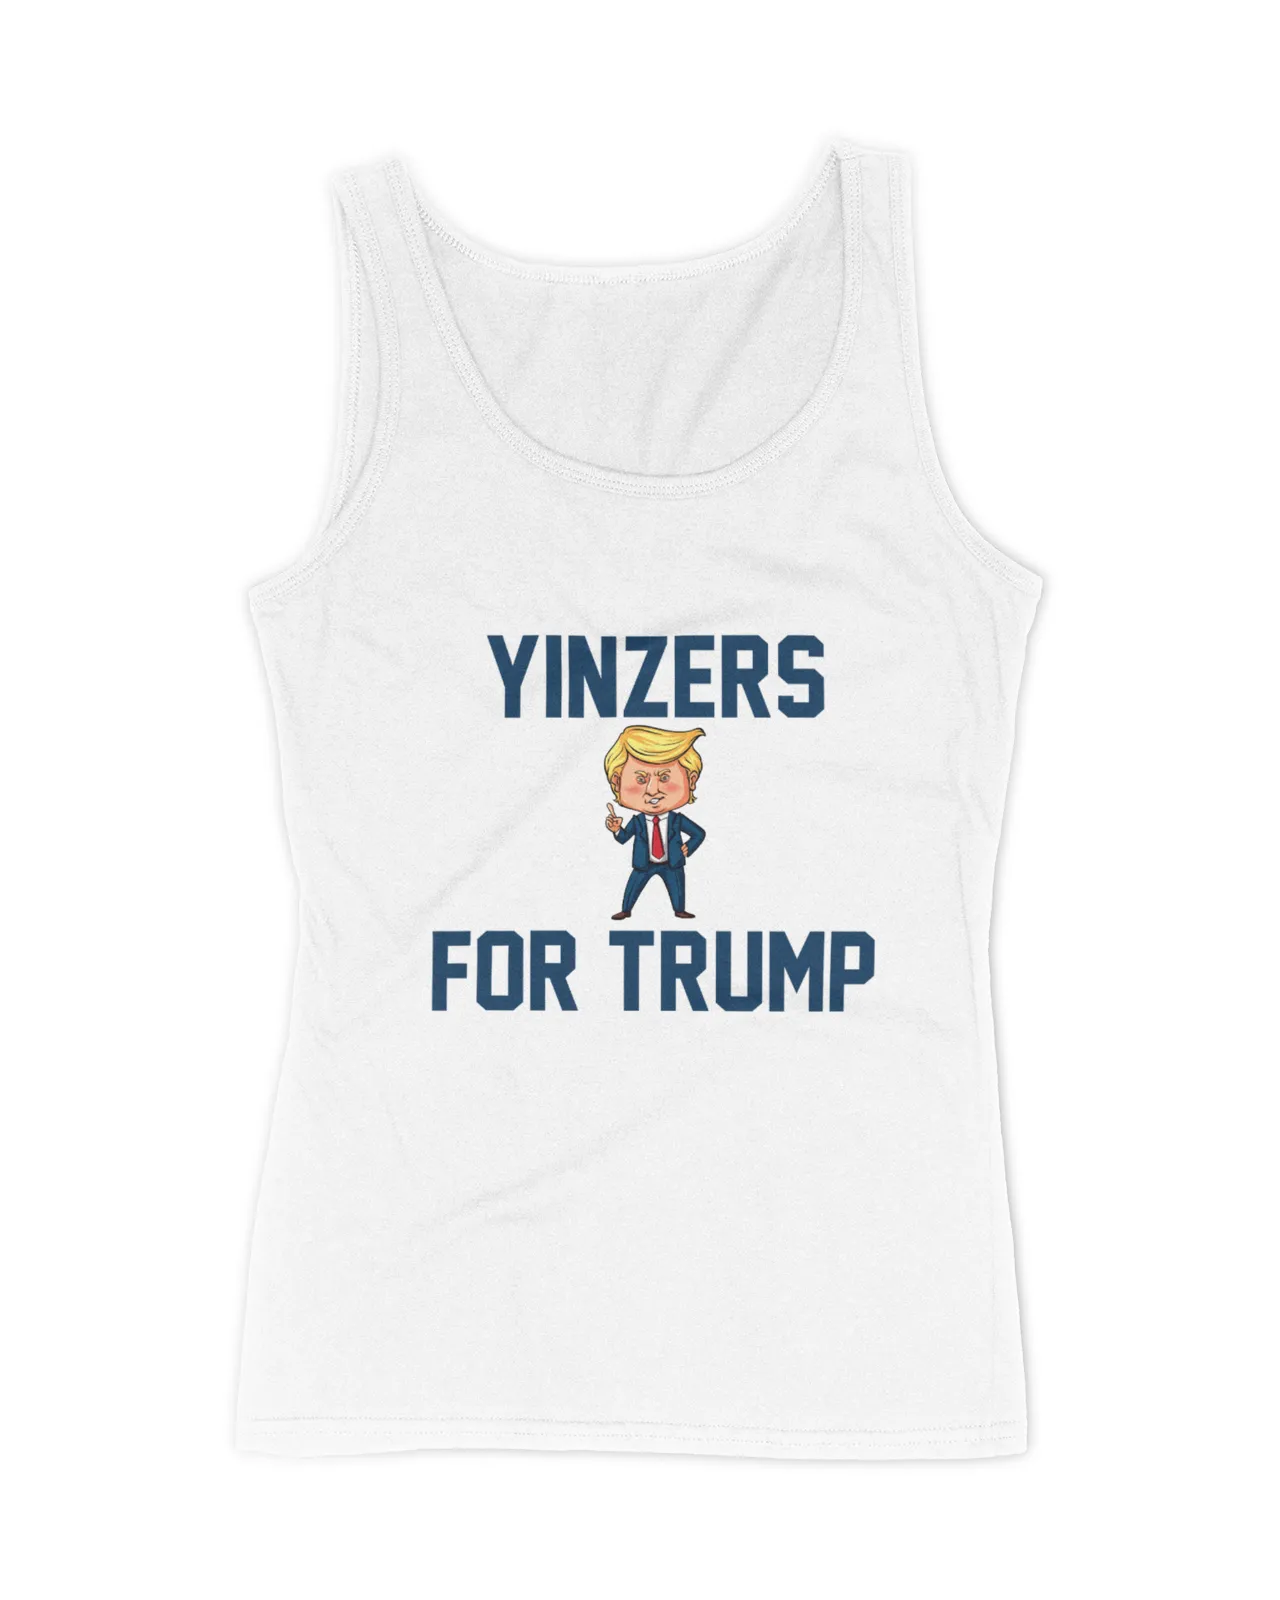 Yinzers for Trump Shirt